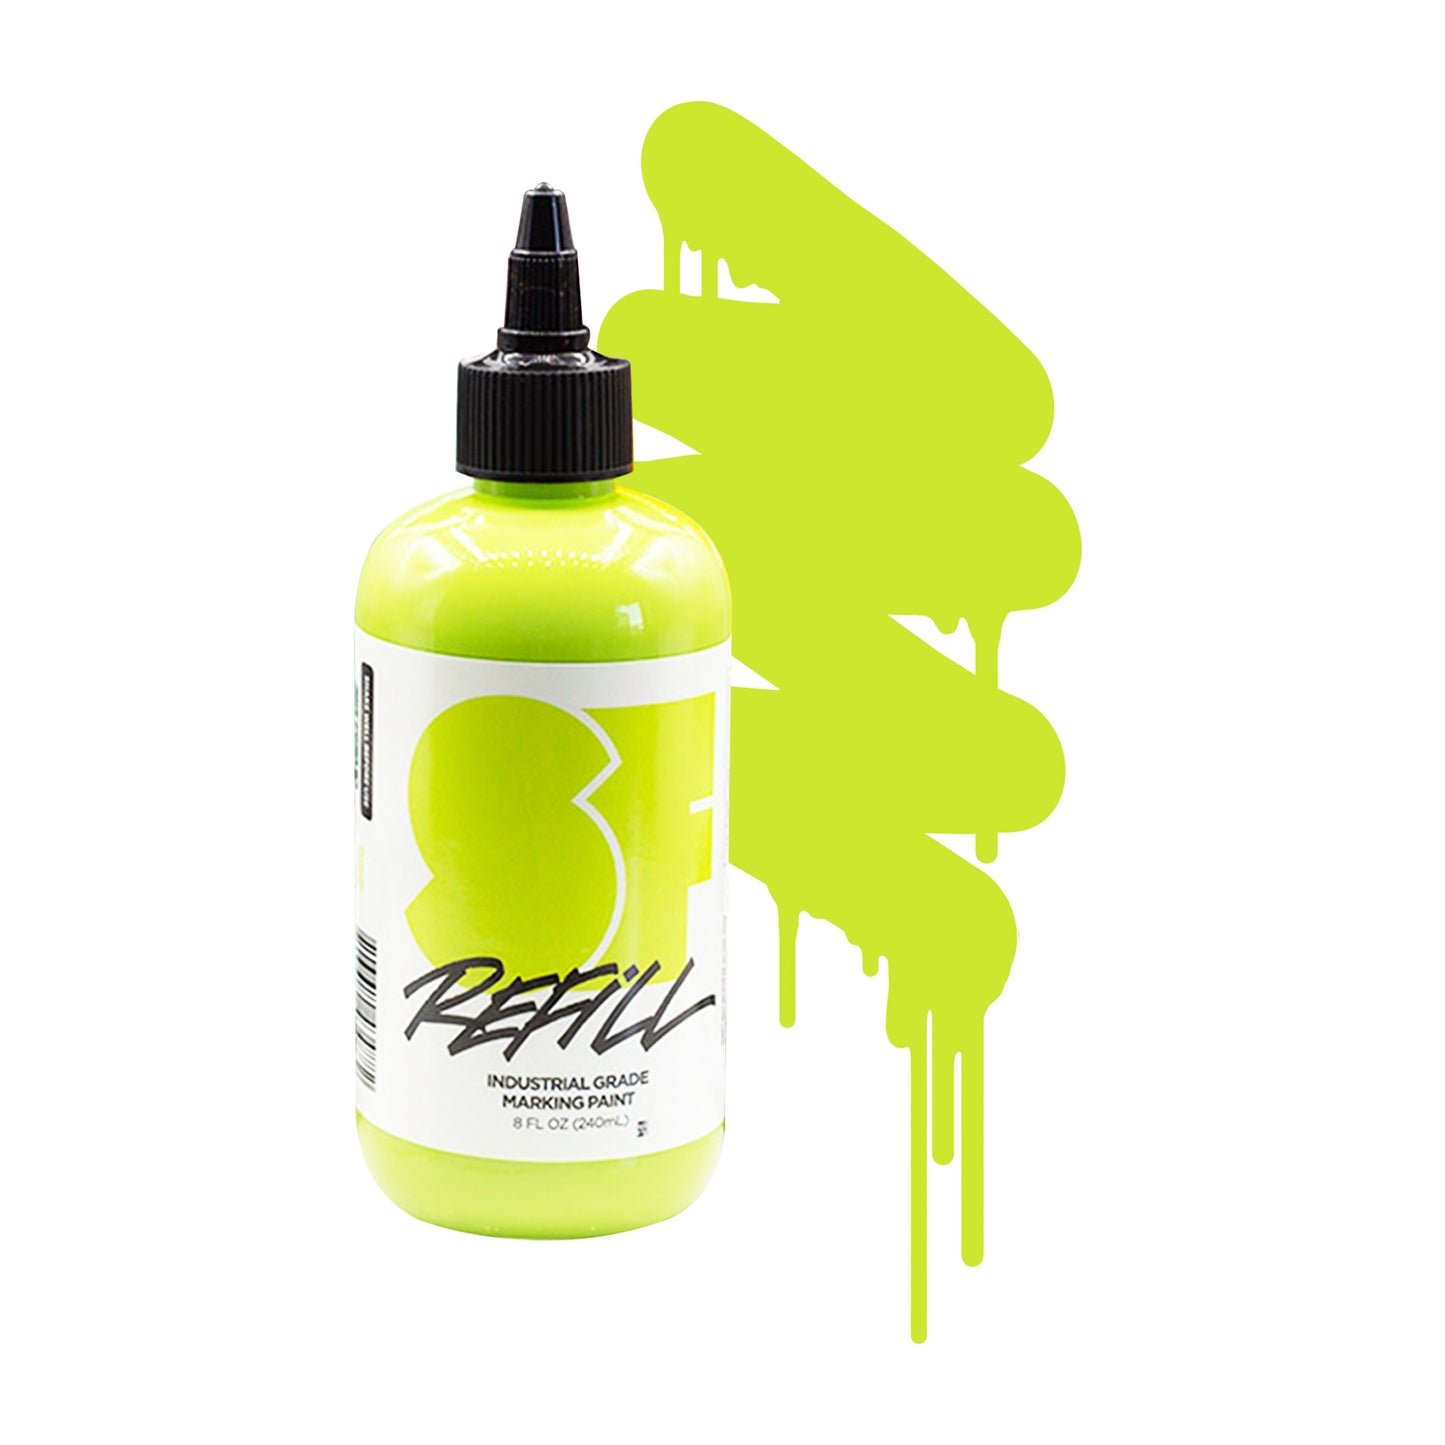 A clear bottle of neon green paint/ink with a tapered lid and a color swatch to the right of it.